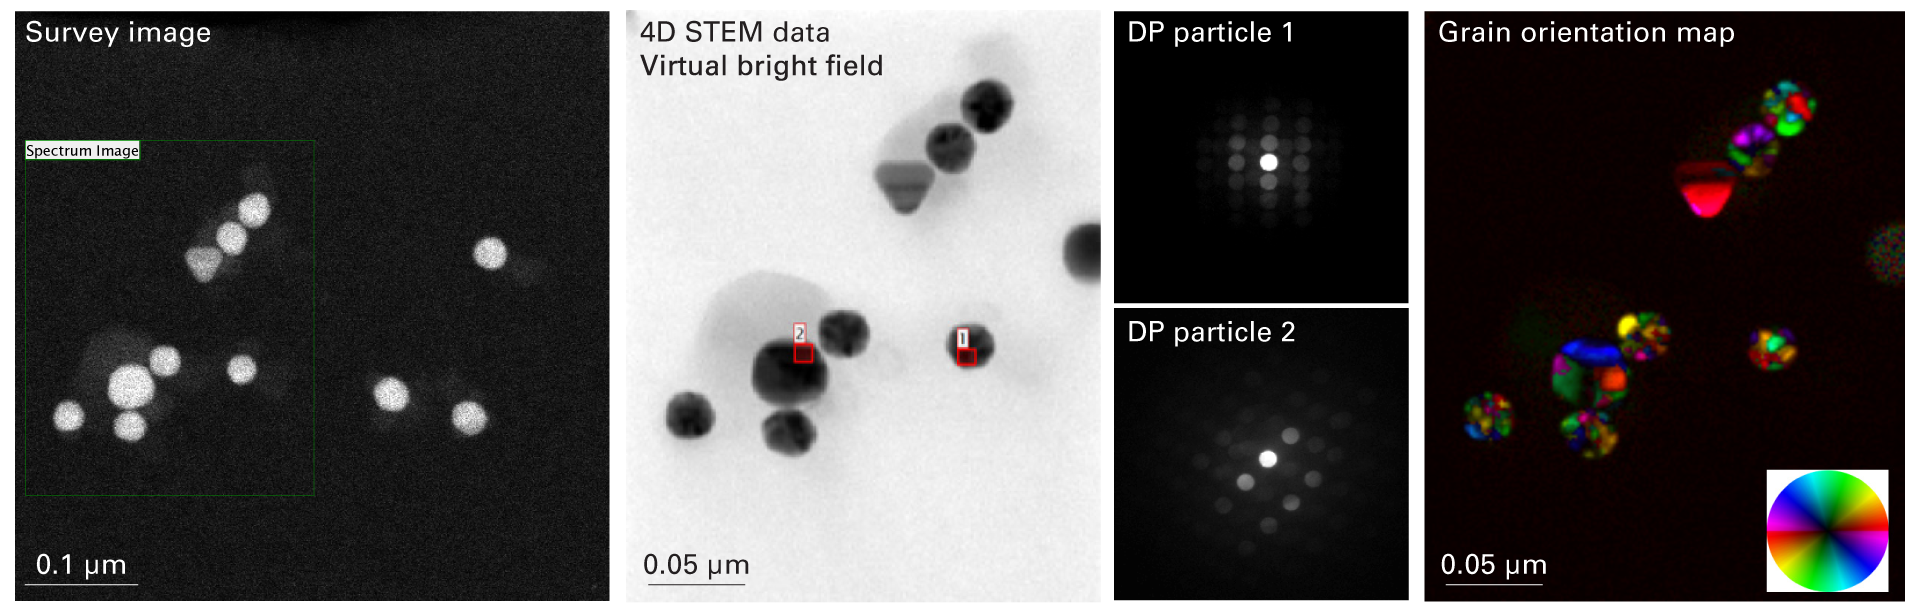 4D STEM diffraction data cube. A 4D STEM diffraction data cube was collected using the Stela camera and STEMx system. Specimen: Au nanoparticles. Scan area: 176 × 218 pixels, Diffraction image size: 256 × 256 pixels. Dwell time: 5 ms. Color map showing grain orientations classified based on the angular position of the maximum diffraction peak per probe position using a DigitalMicrograph script.